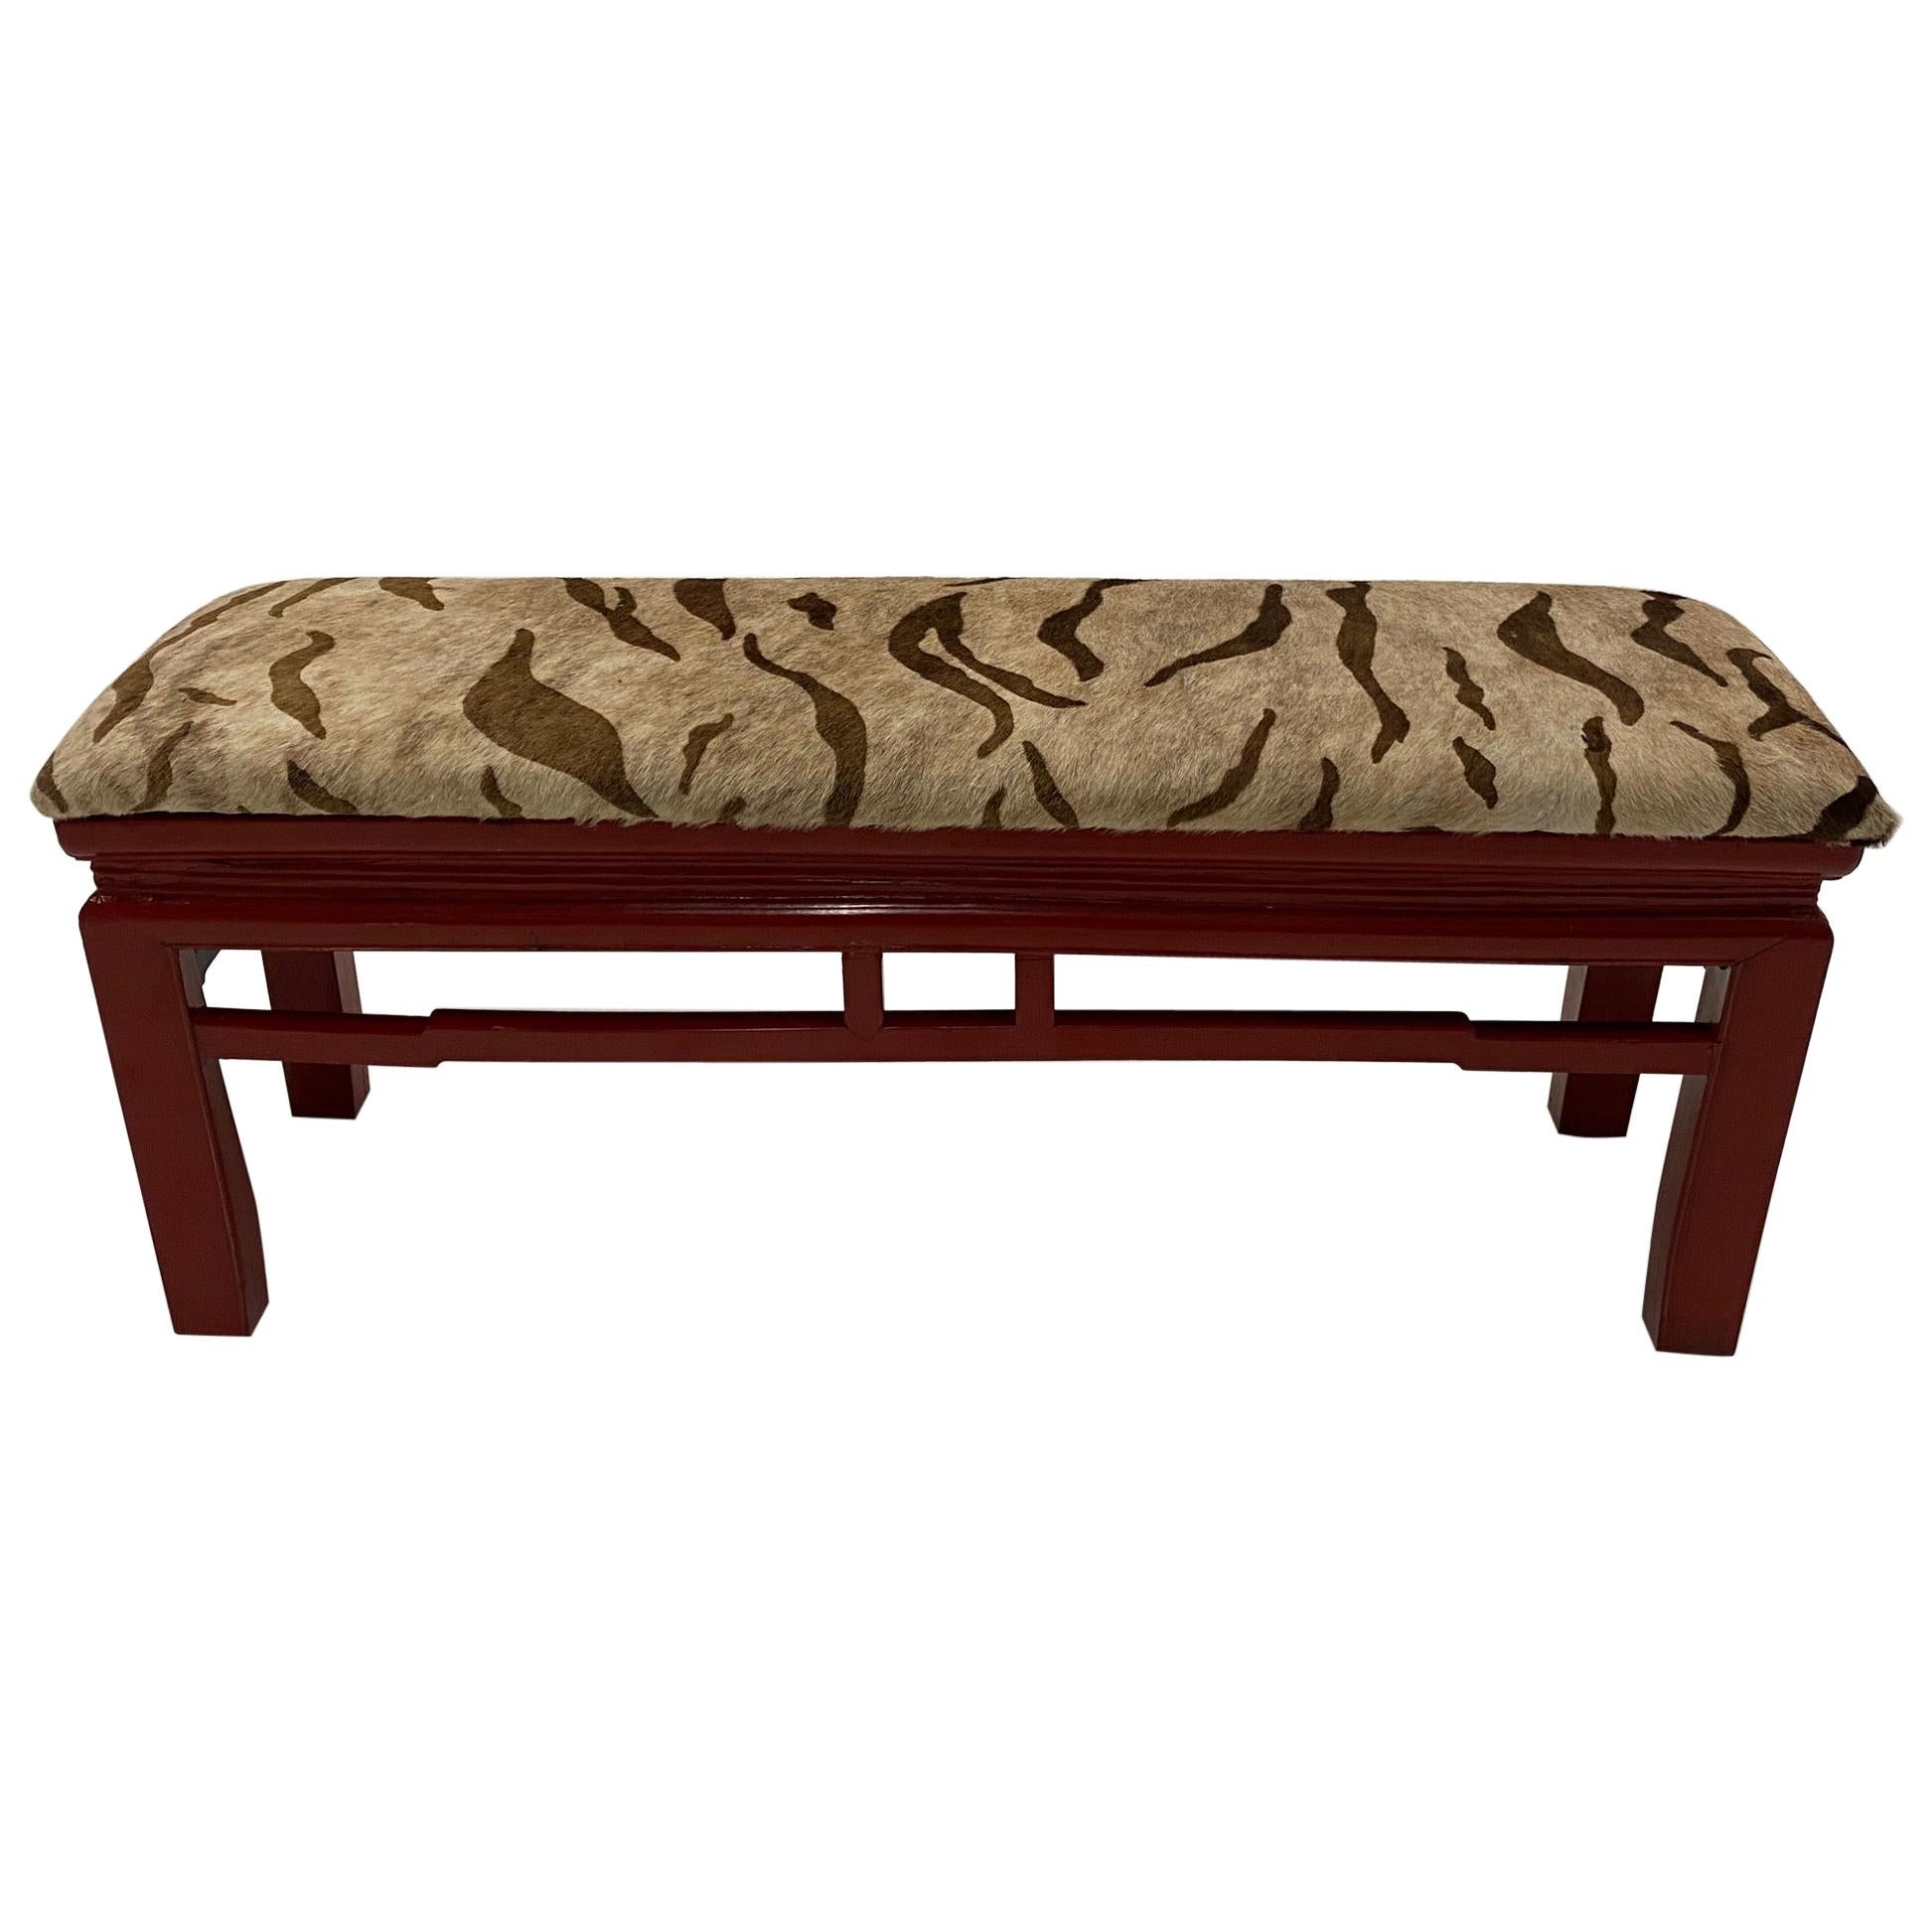 Stunning Asian Cinnabar Red Lacquer Bench Upholstered in Printed Cowhide For Sale